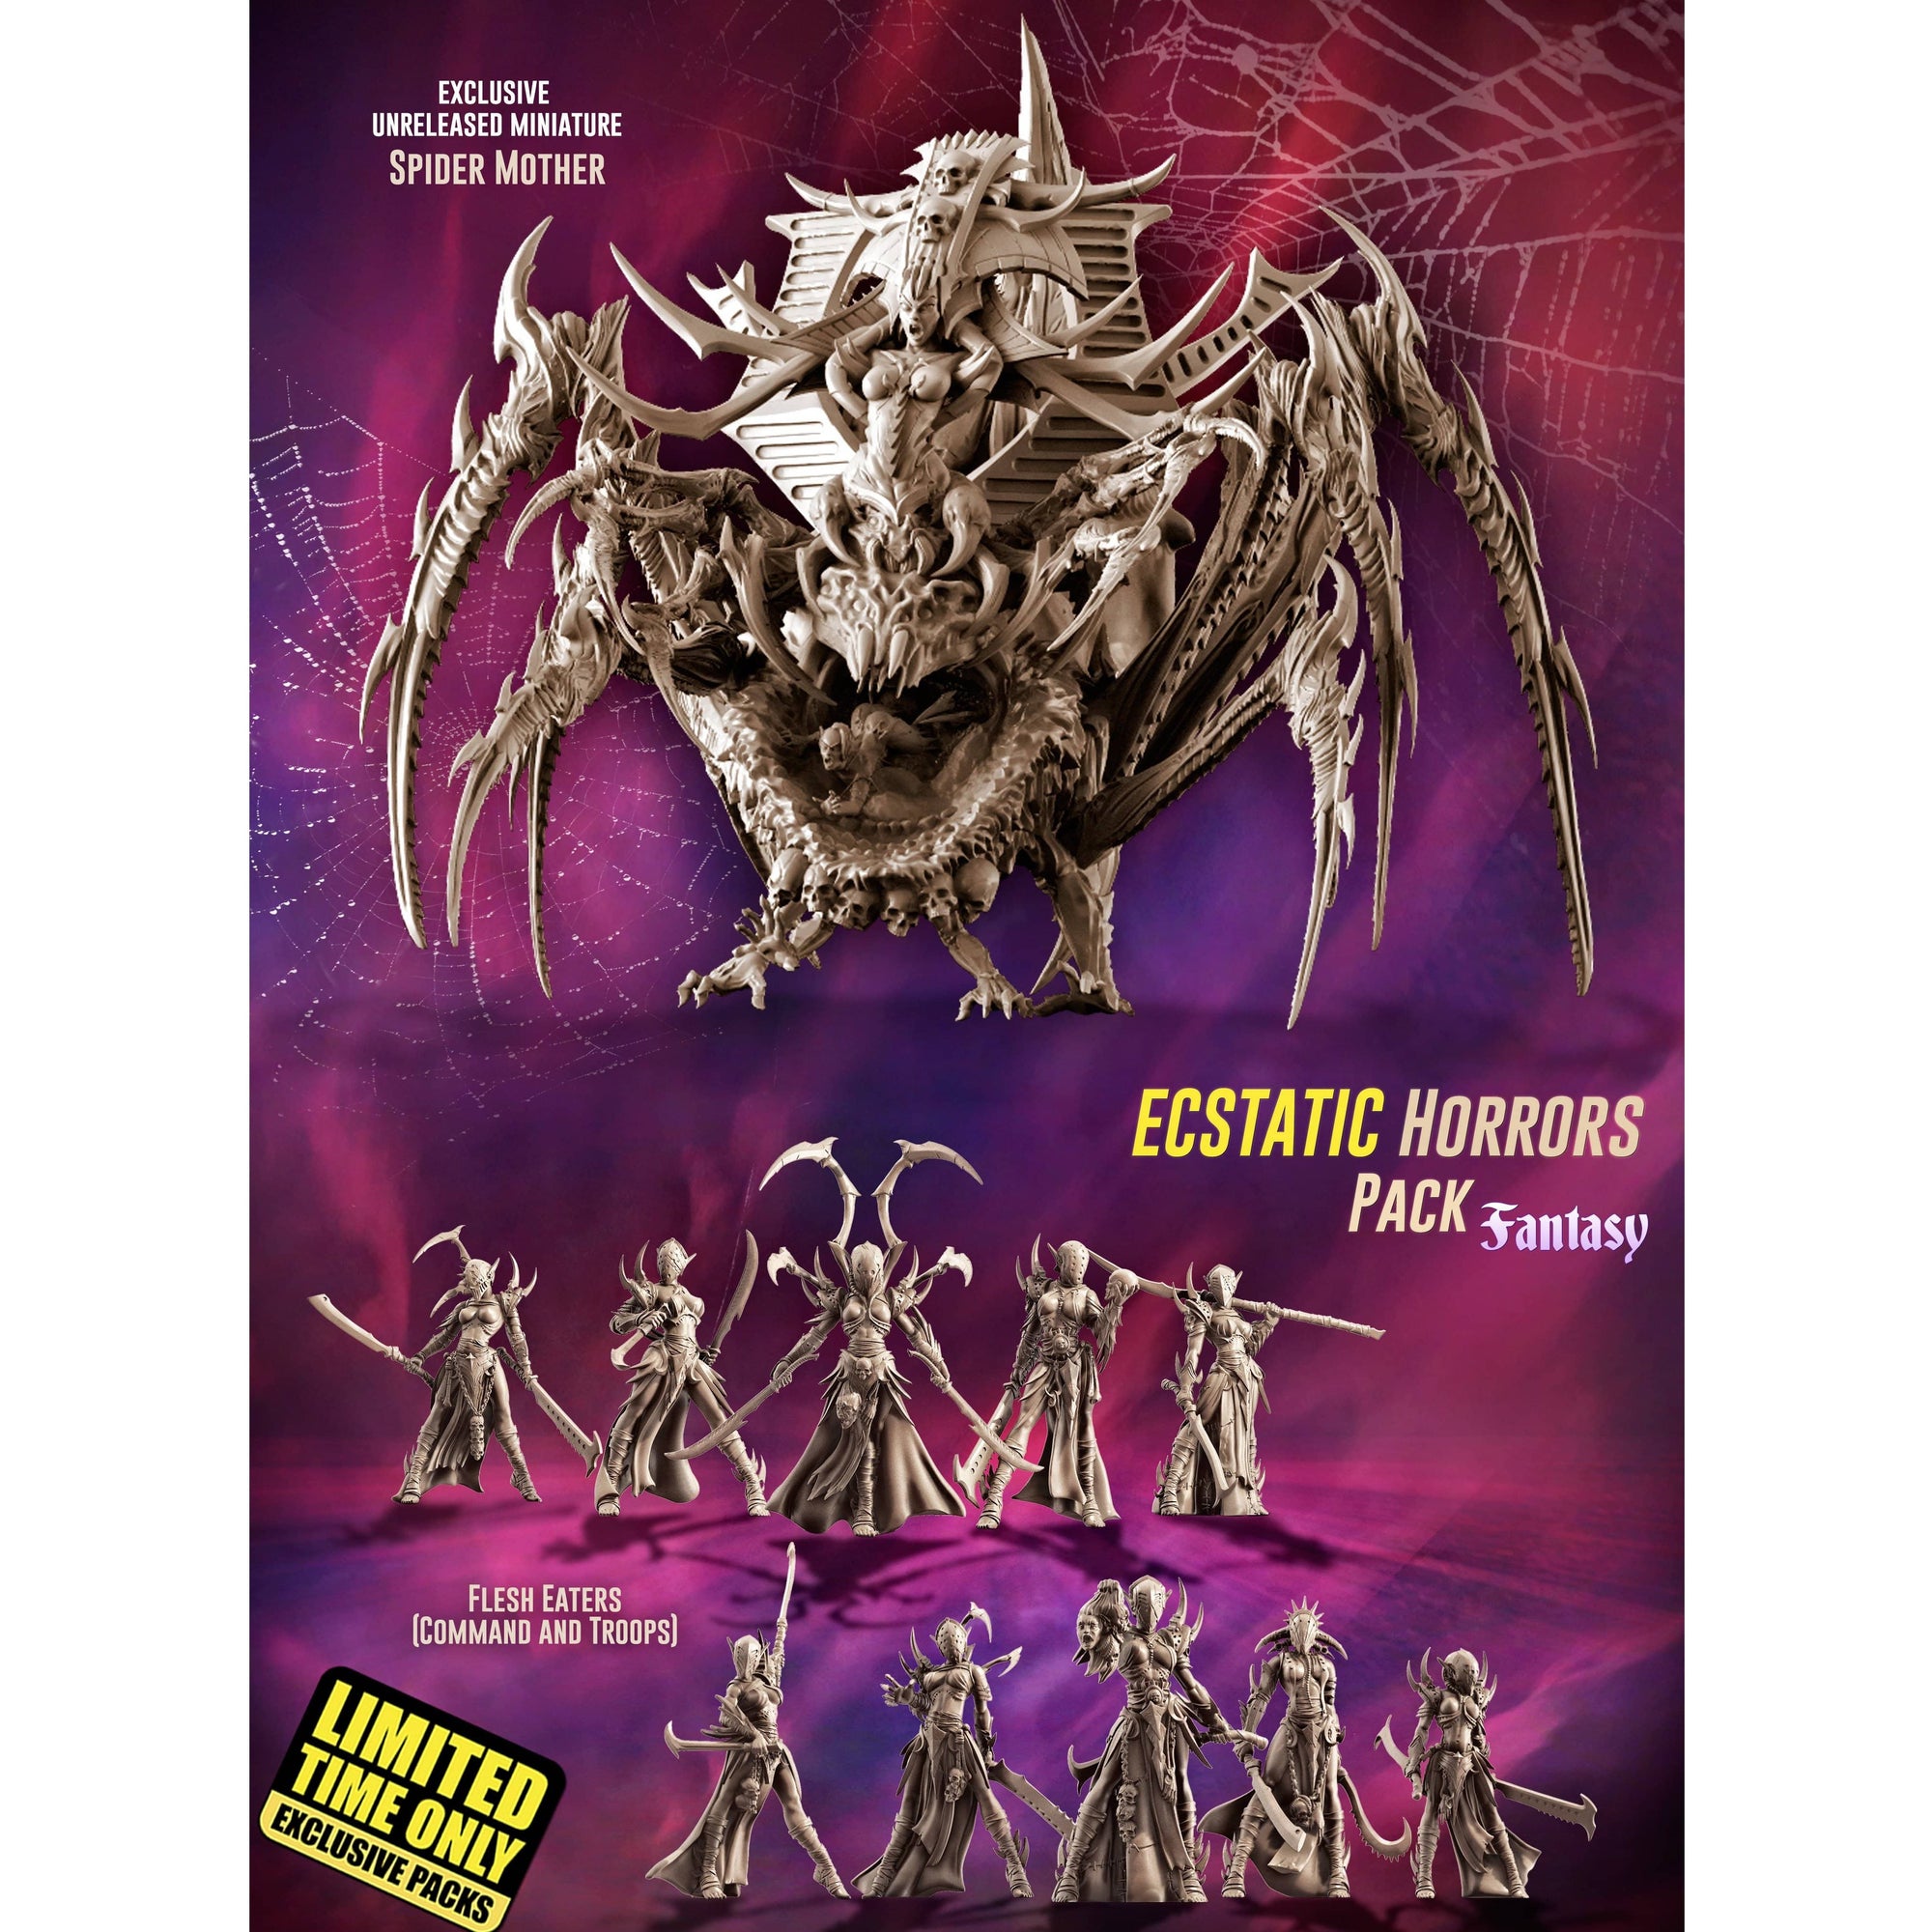 Pack Exclusive Ecstatic Horrors (Le - Fantasy)